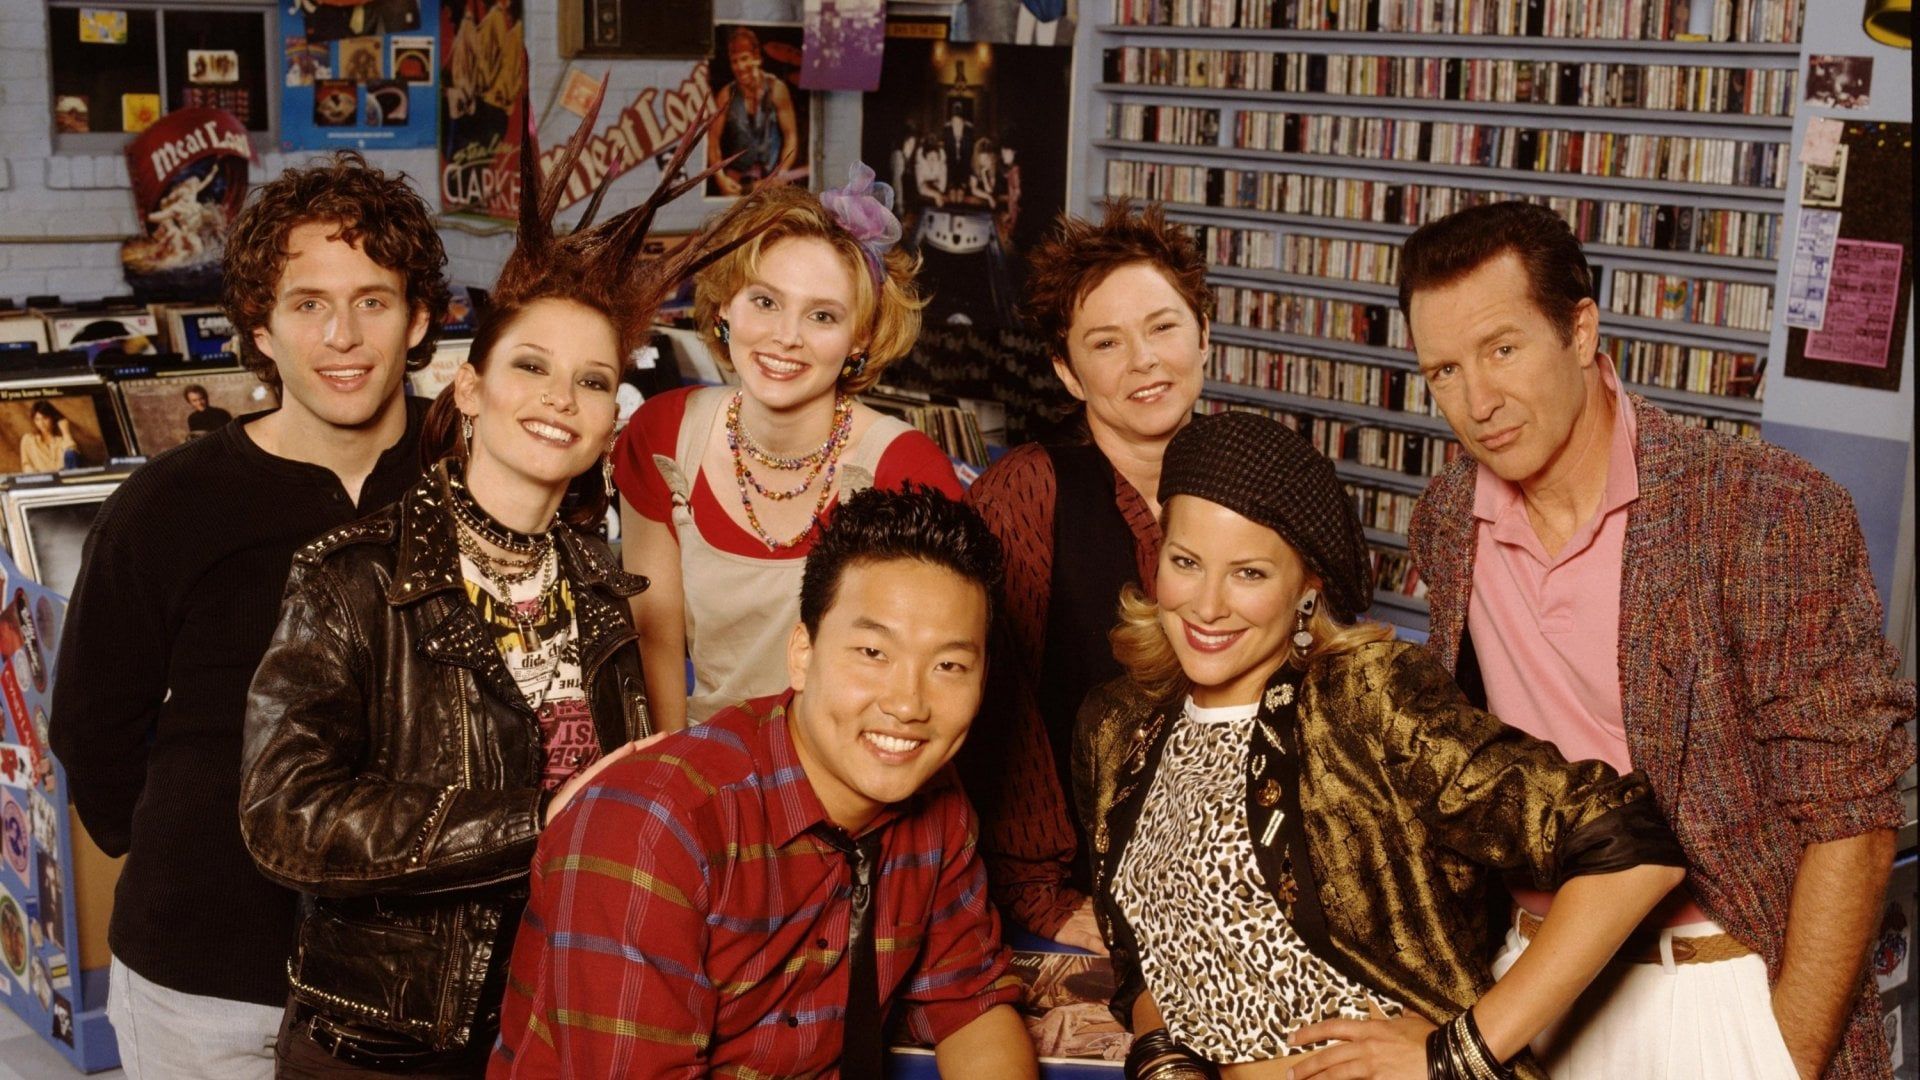 10 Things You Didn’t Know About That ‘80s Show